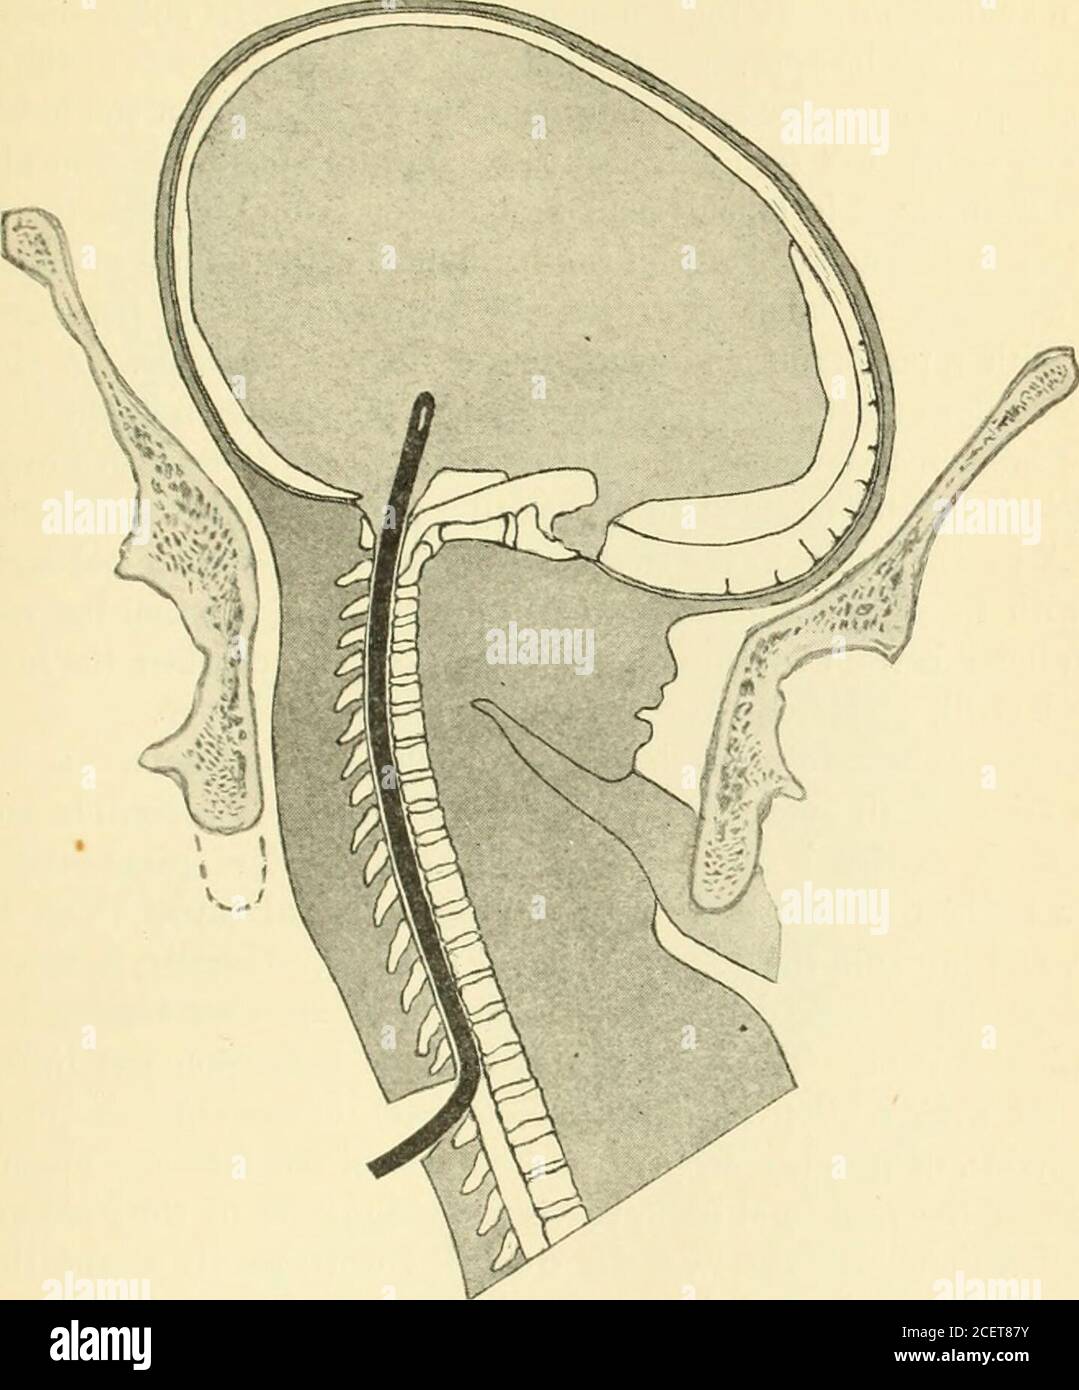 . An American text-book of obstetrics. For practitioners and students. 1. Skeleton of hydrocephalus (Hirst Collection, University of Pennsylvania). 2. Hydrocephalus(Hirst). 3. Hydrencephalocele posterior (Hirst and Piersol). 4. Hydrencephalocele superior. 5. Hydro-cephalus distending lower uterine segment (Varnier). 6. Tapping a hydrocephalus through the spinal canal, DYSTOCIA. 565 its bulk may constitute thereby an obstruction in labor. Cystic tumors, effu-sions in the serous cavities, anasarca, an enlarged liver, polycystic disease ofthe kidneys,24 and distended bladder from atresia of the u Stock Photo